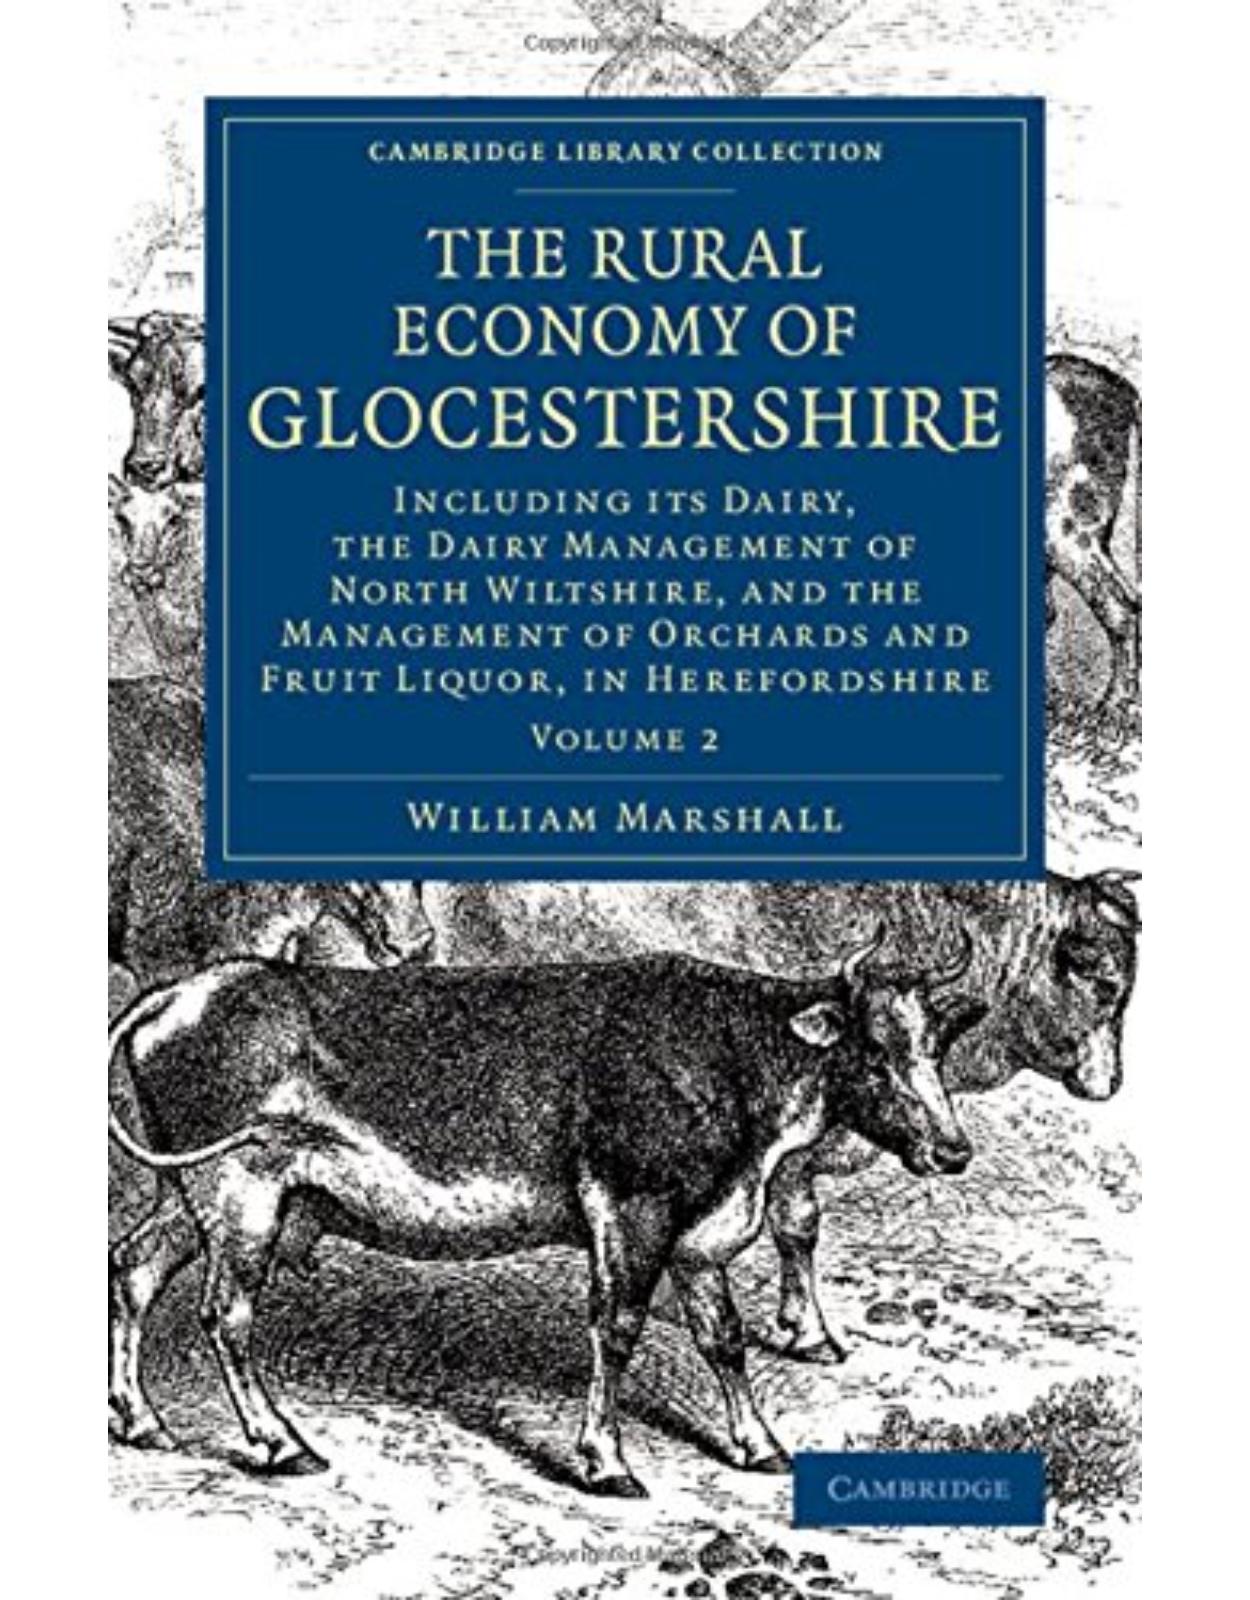 The Rural Economy of Glocestershire: Including its Dairy, Together with the Dairy Management of North Wiltshire, and the Management of Orchards and Fruit Liquor, in Herefordshire (Volume 2)